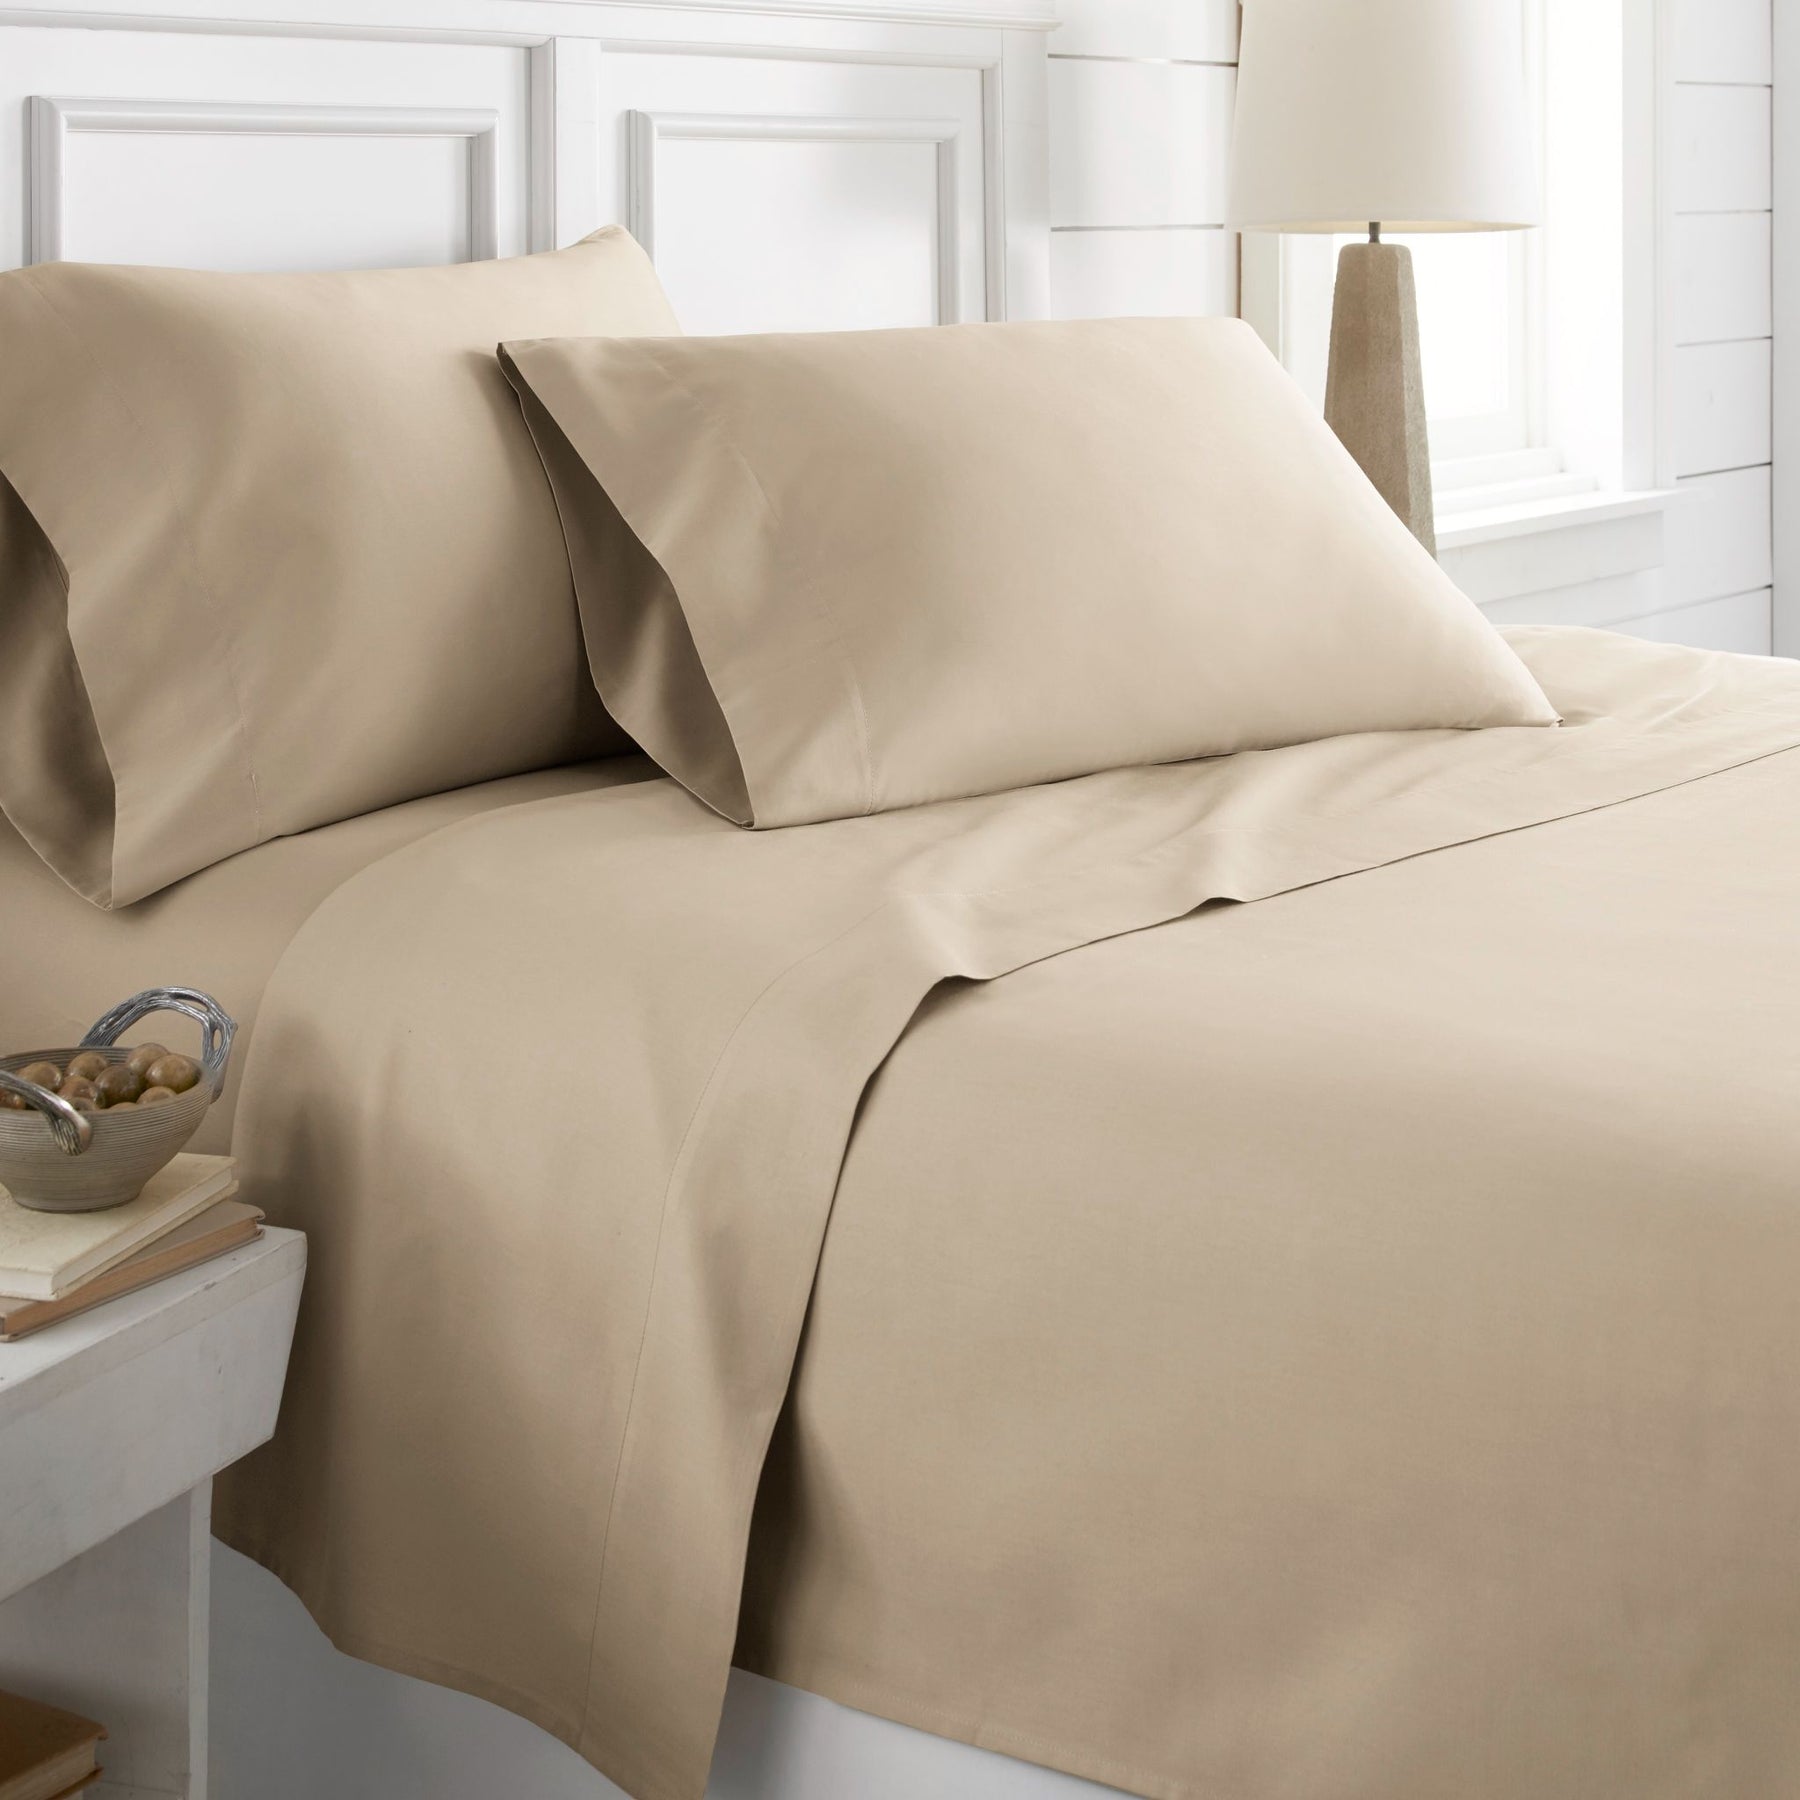 https://cdn.shopify.com/s/files/1/0405/2756/0870/products/egyptian-cotton-solid-sheets-beige_1800x1800.jpg?v=1648030926